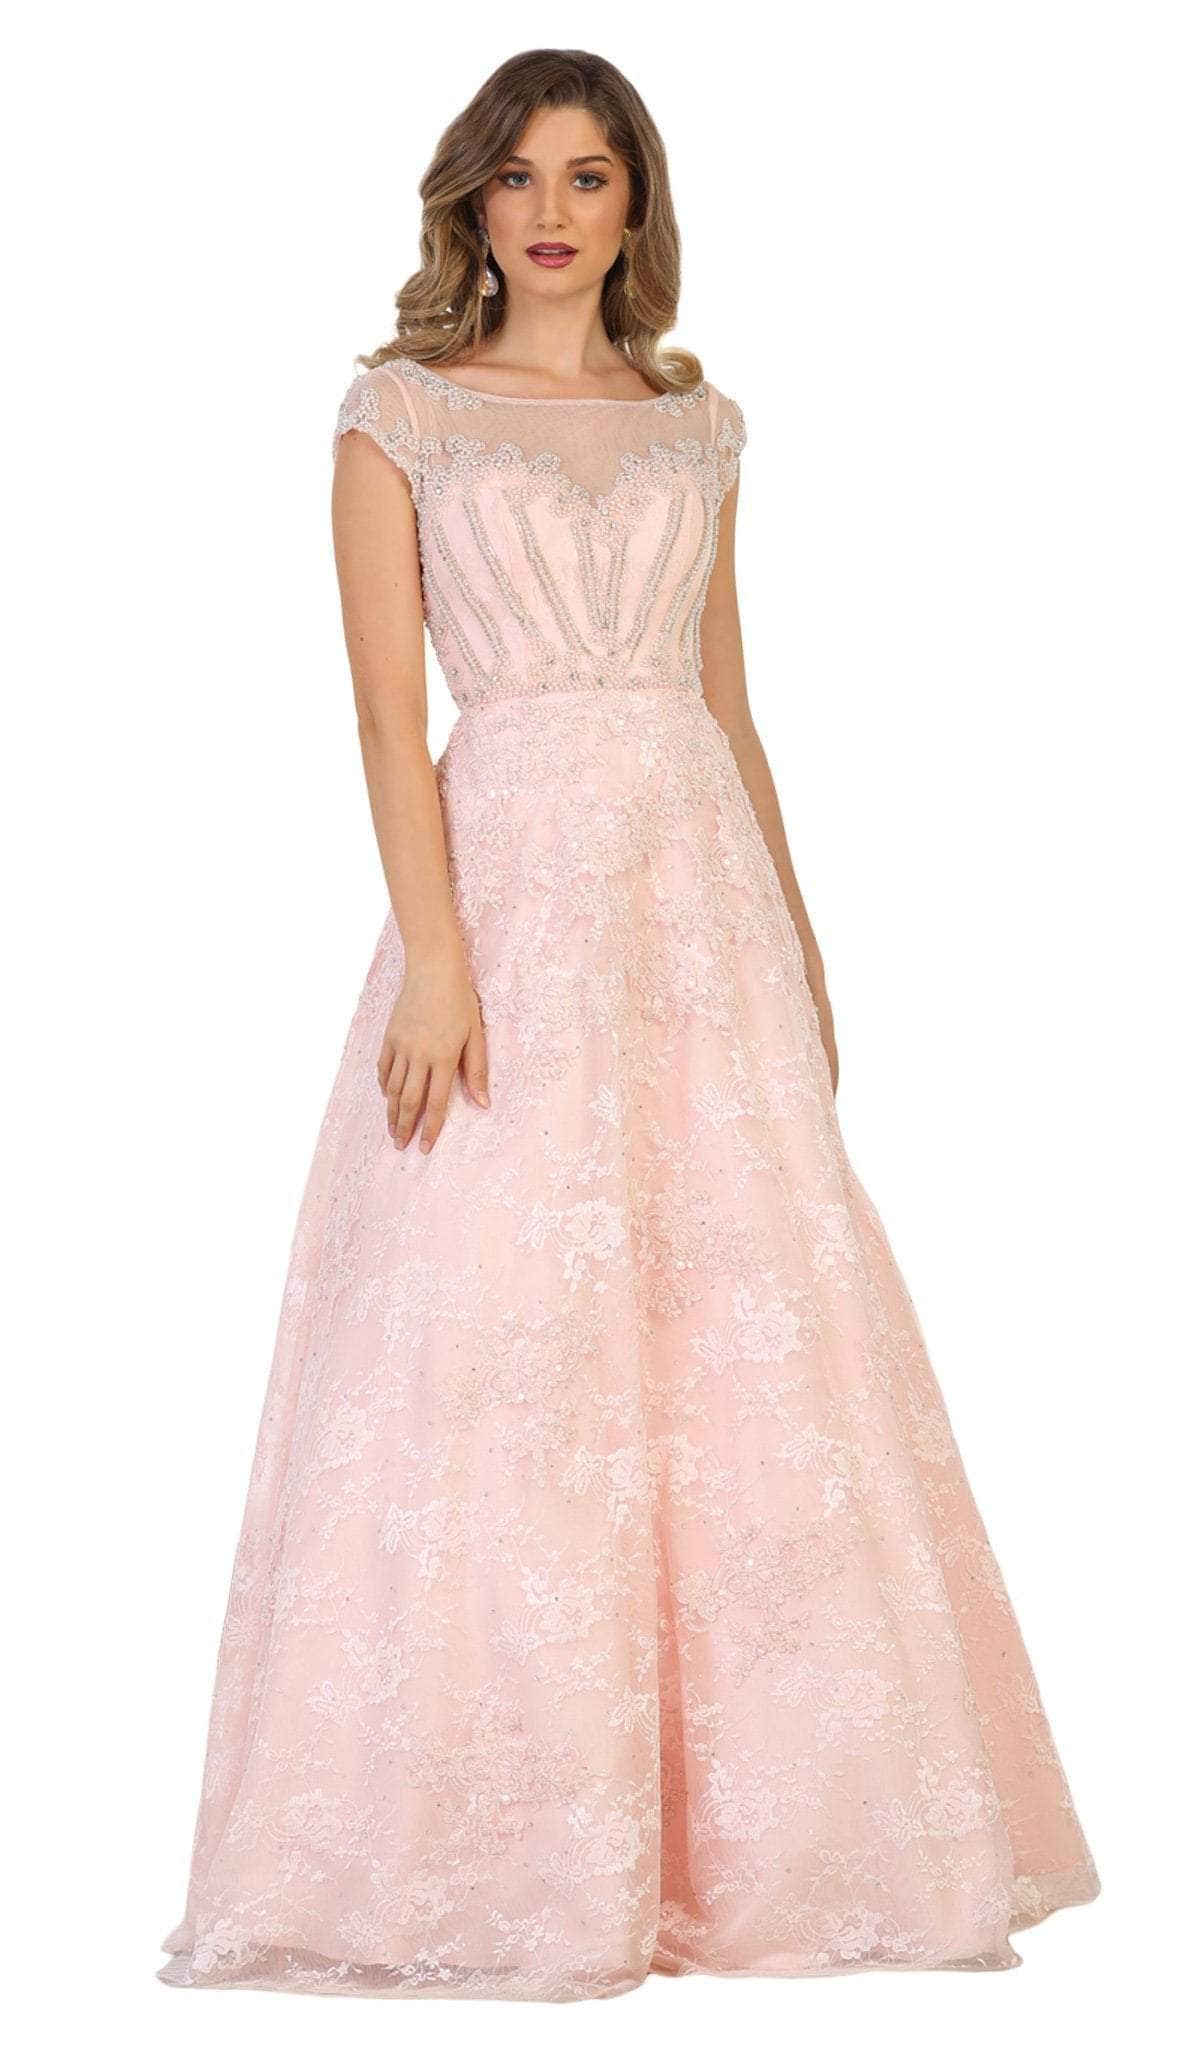 May Queen RQ7612 - Cap Sleeve A-Line Formal Dress Special Occasion Dresses 10 /Blush